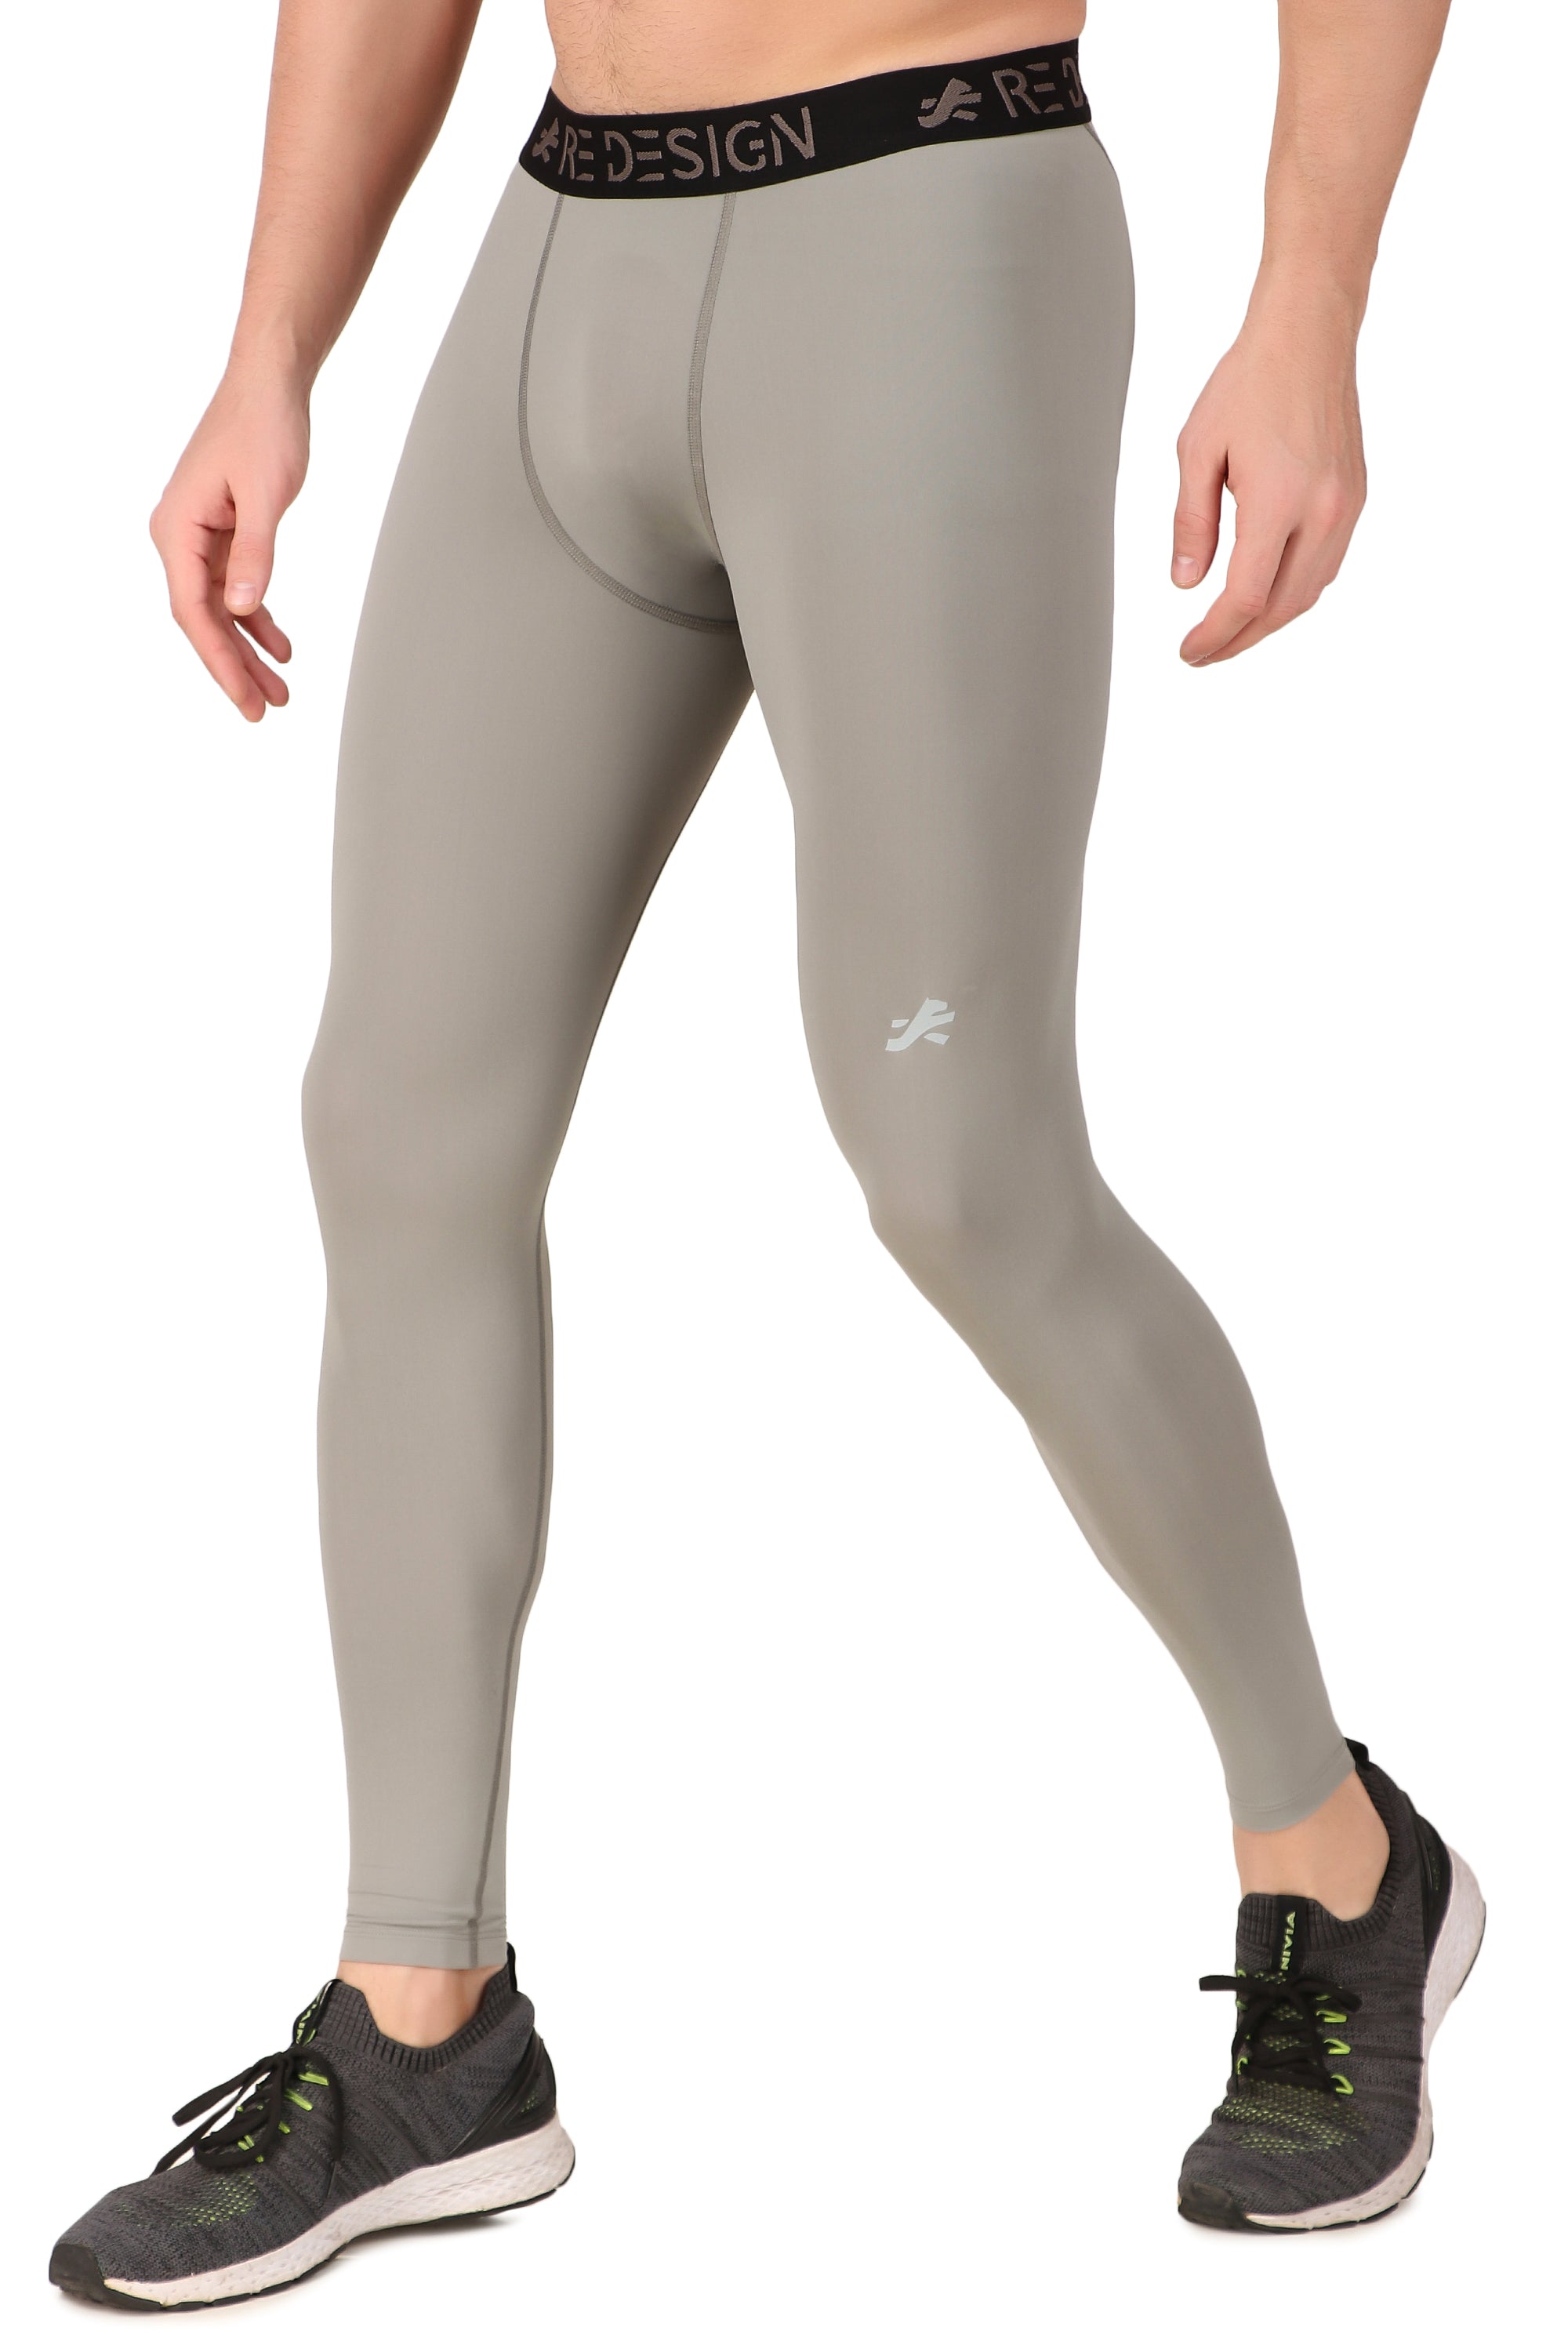 Nylon Compression Pant and Full Tights For Men (Light Grey) – ReDesign  Sports